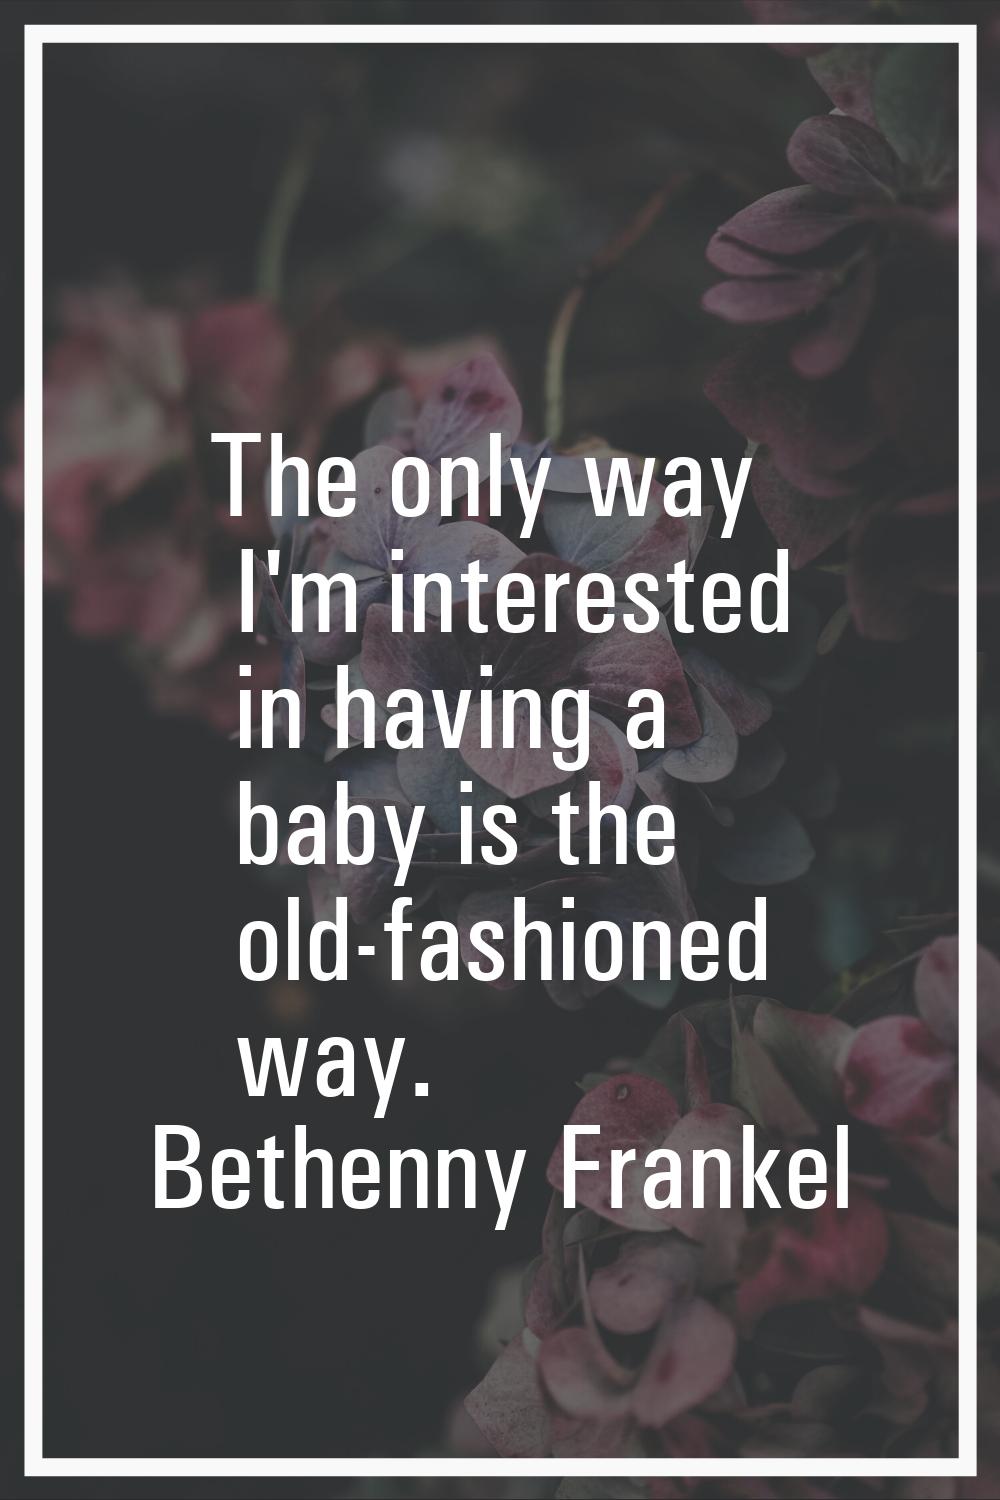 The only way I'm interested in having a baby is the old-fashioned way.